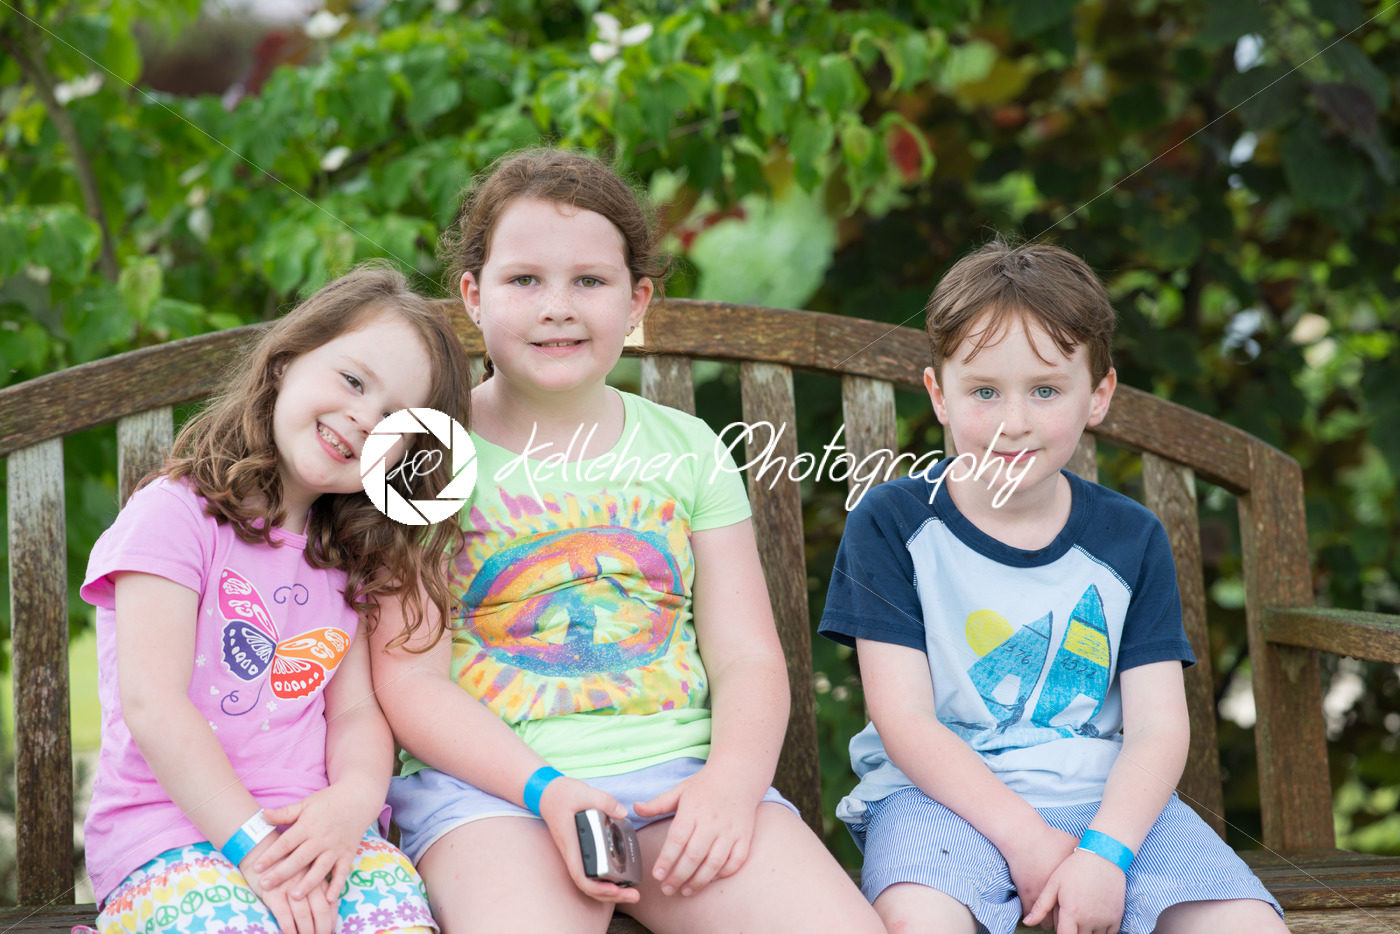 Three young siblings sitting on bench outdoors - Kelleher Photography Store